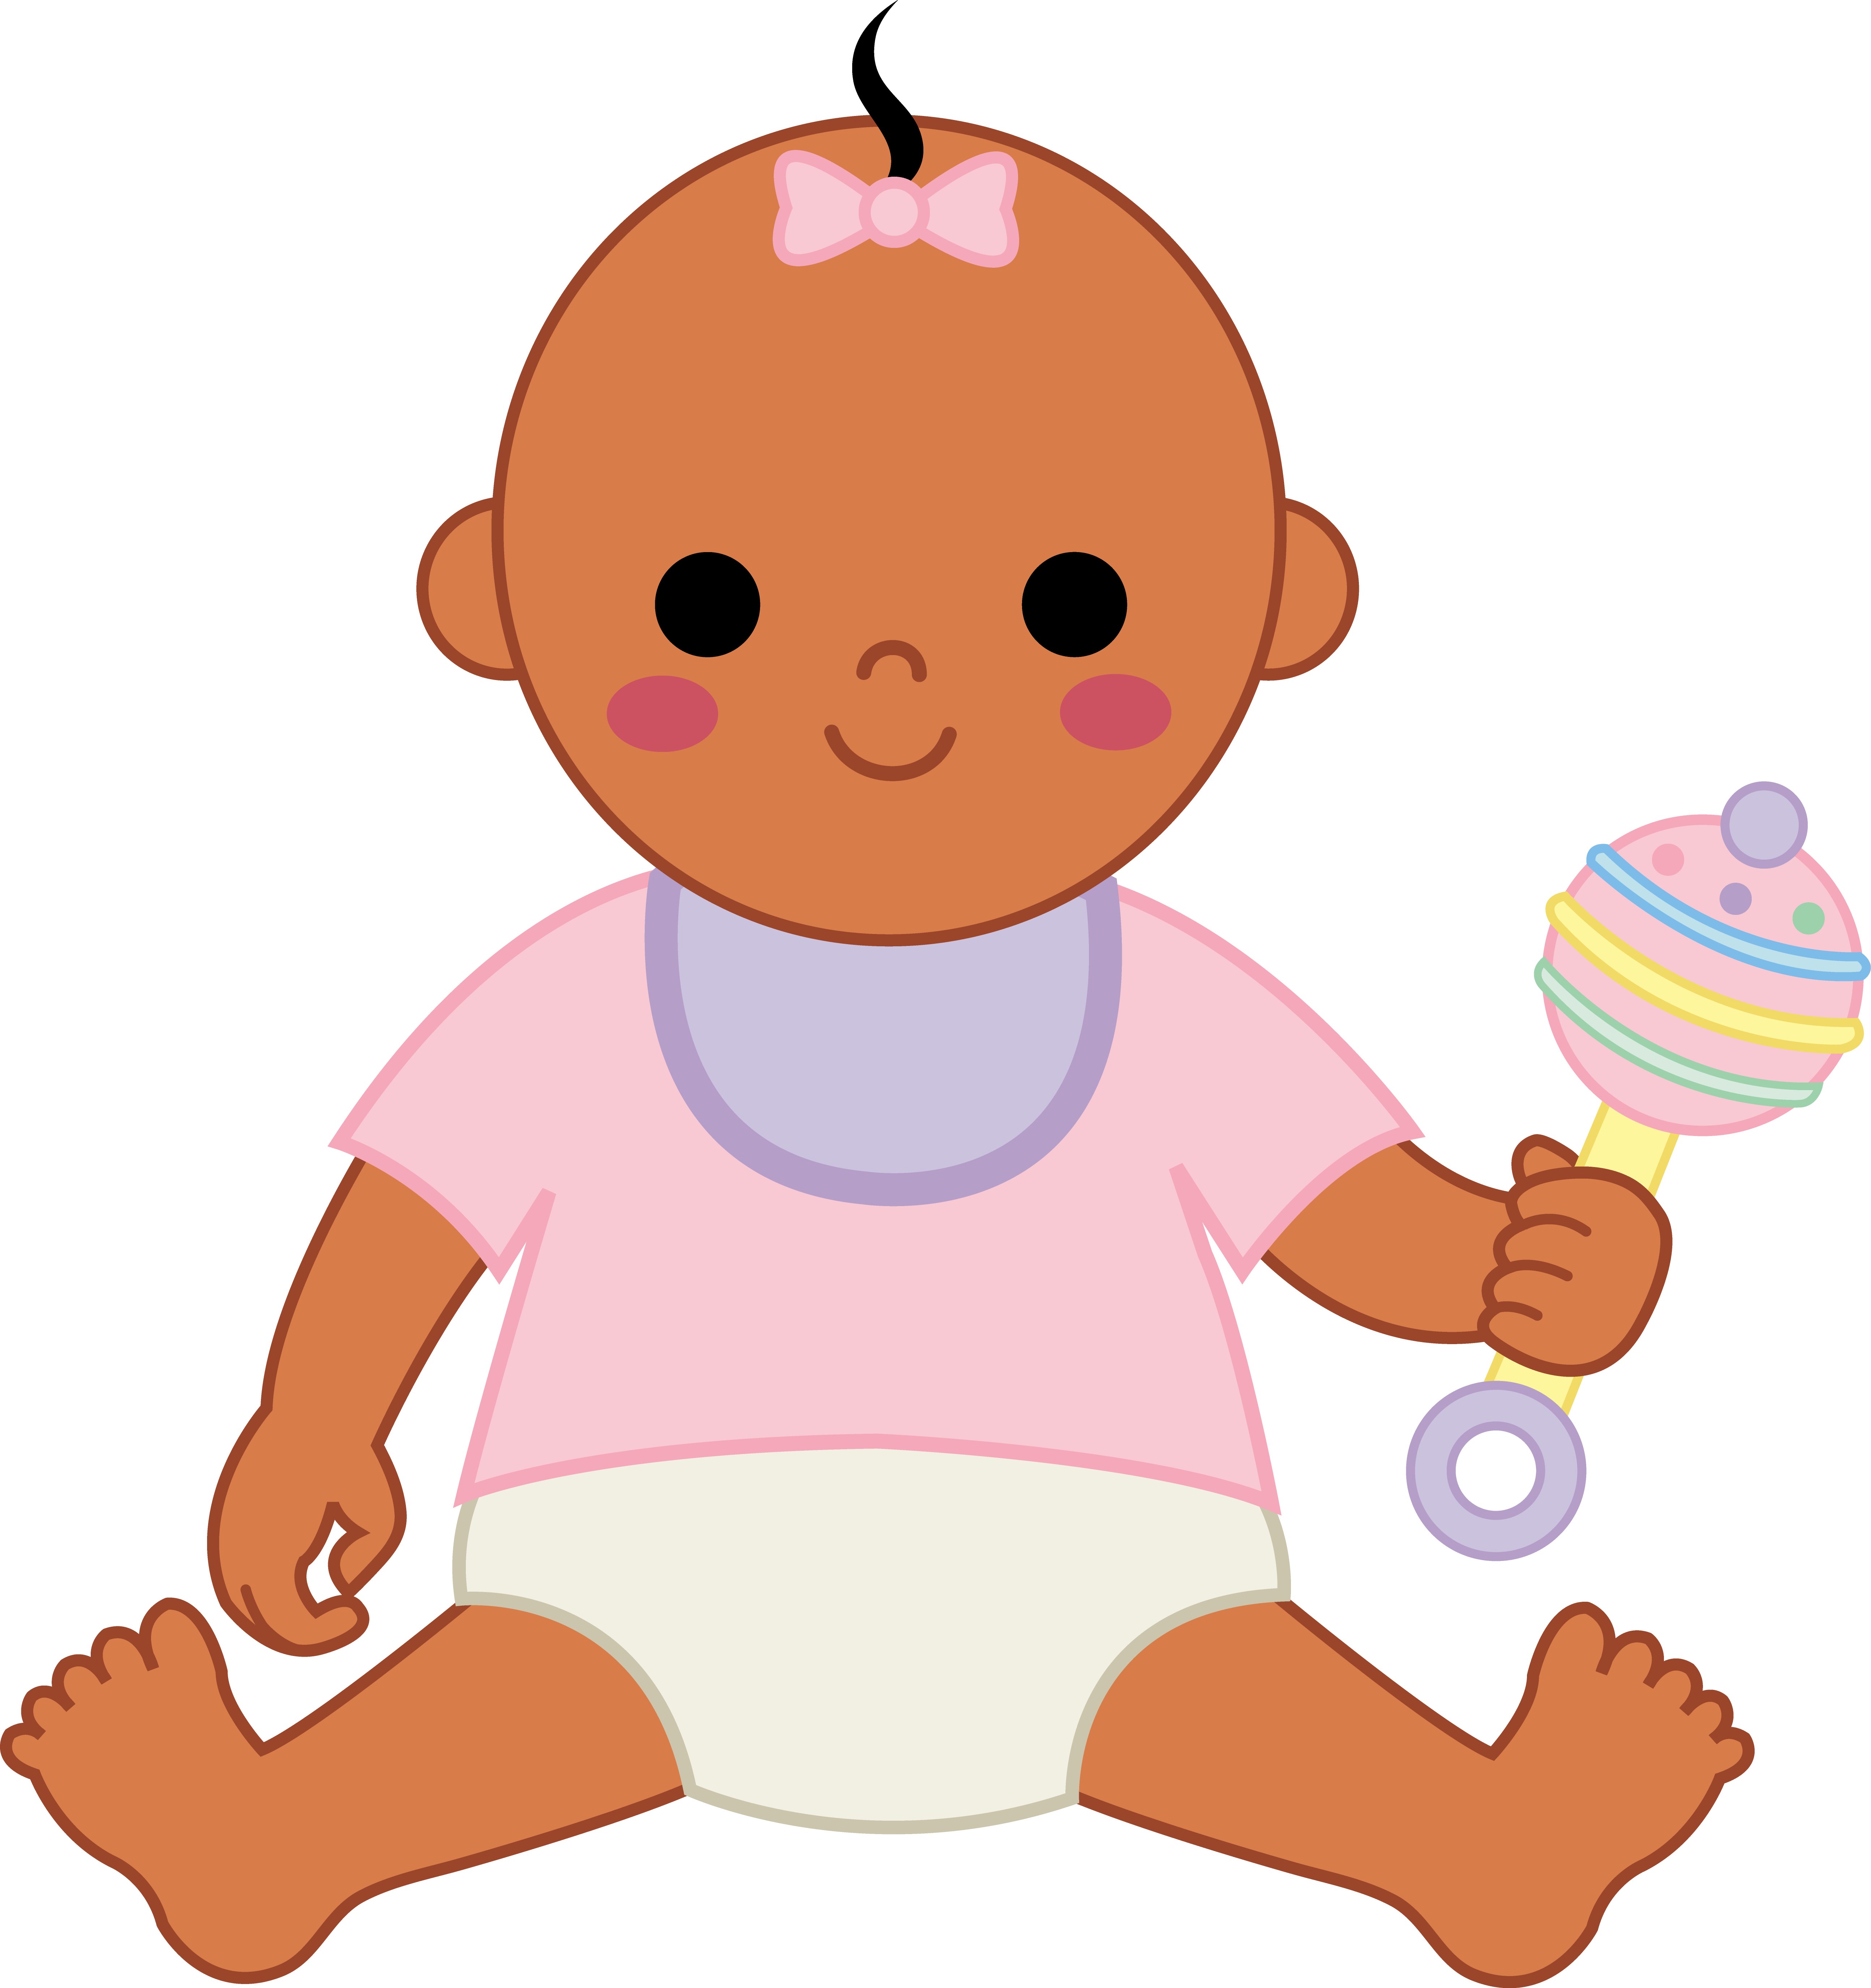 A Cartoon Of A Baby Holding A Rattle